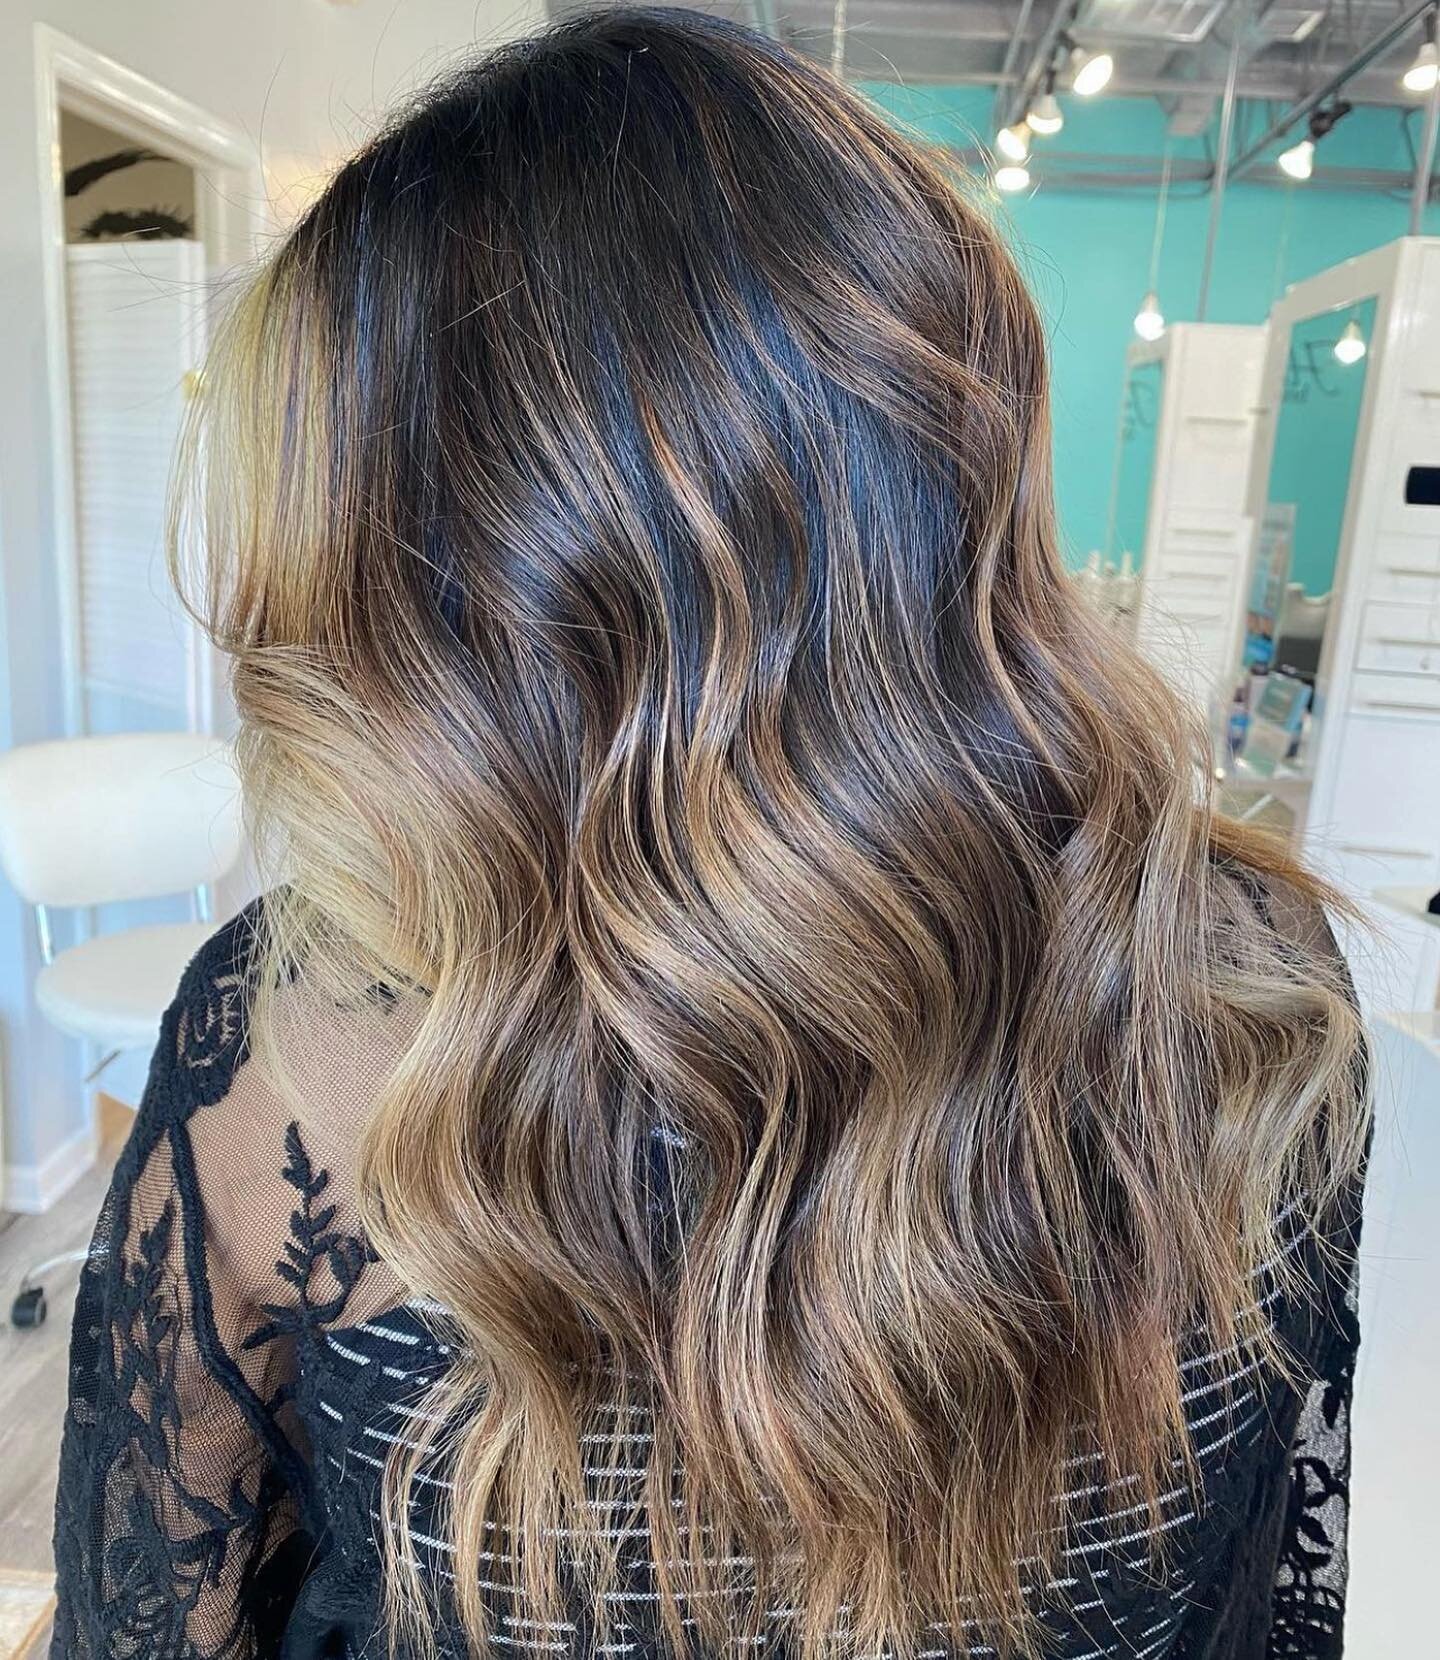 HONEY BALAYAGE 🍯🤎 

Stunning balayage done by our amazing stylist @kimsglamour 

Call to book an appointment with her at 609-599-9094